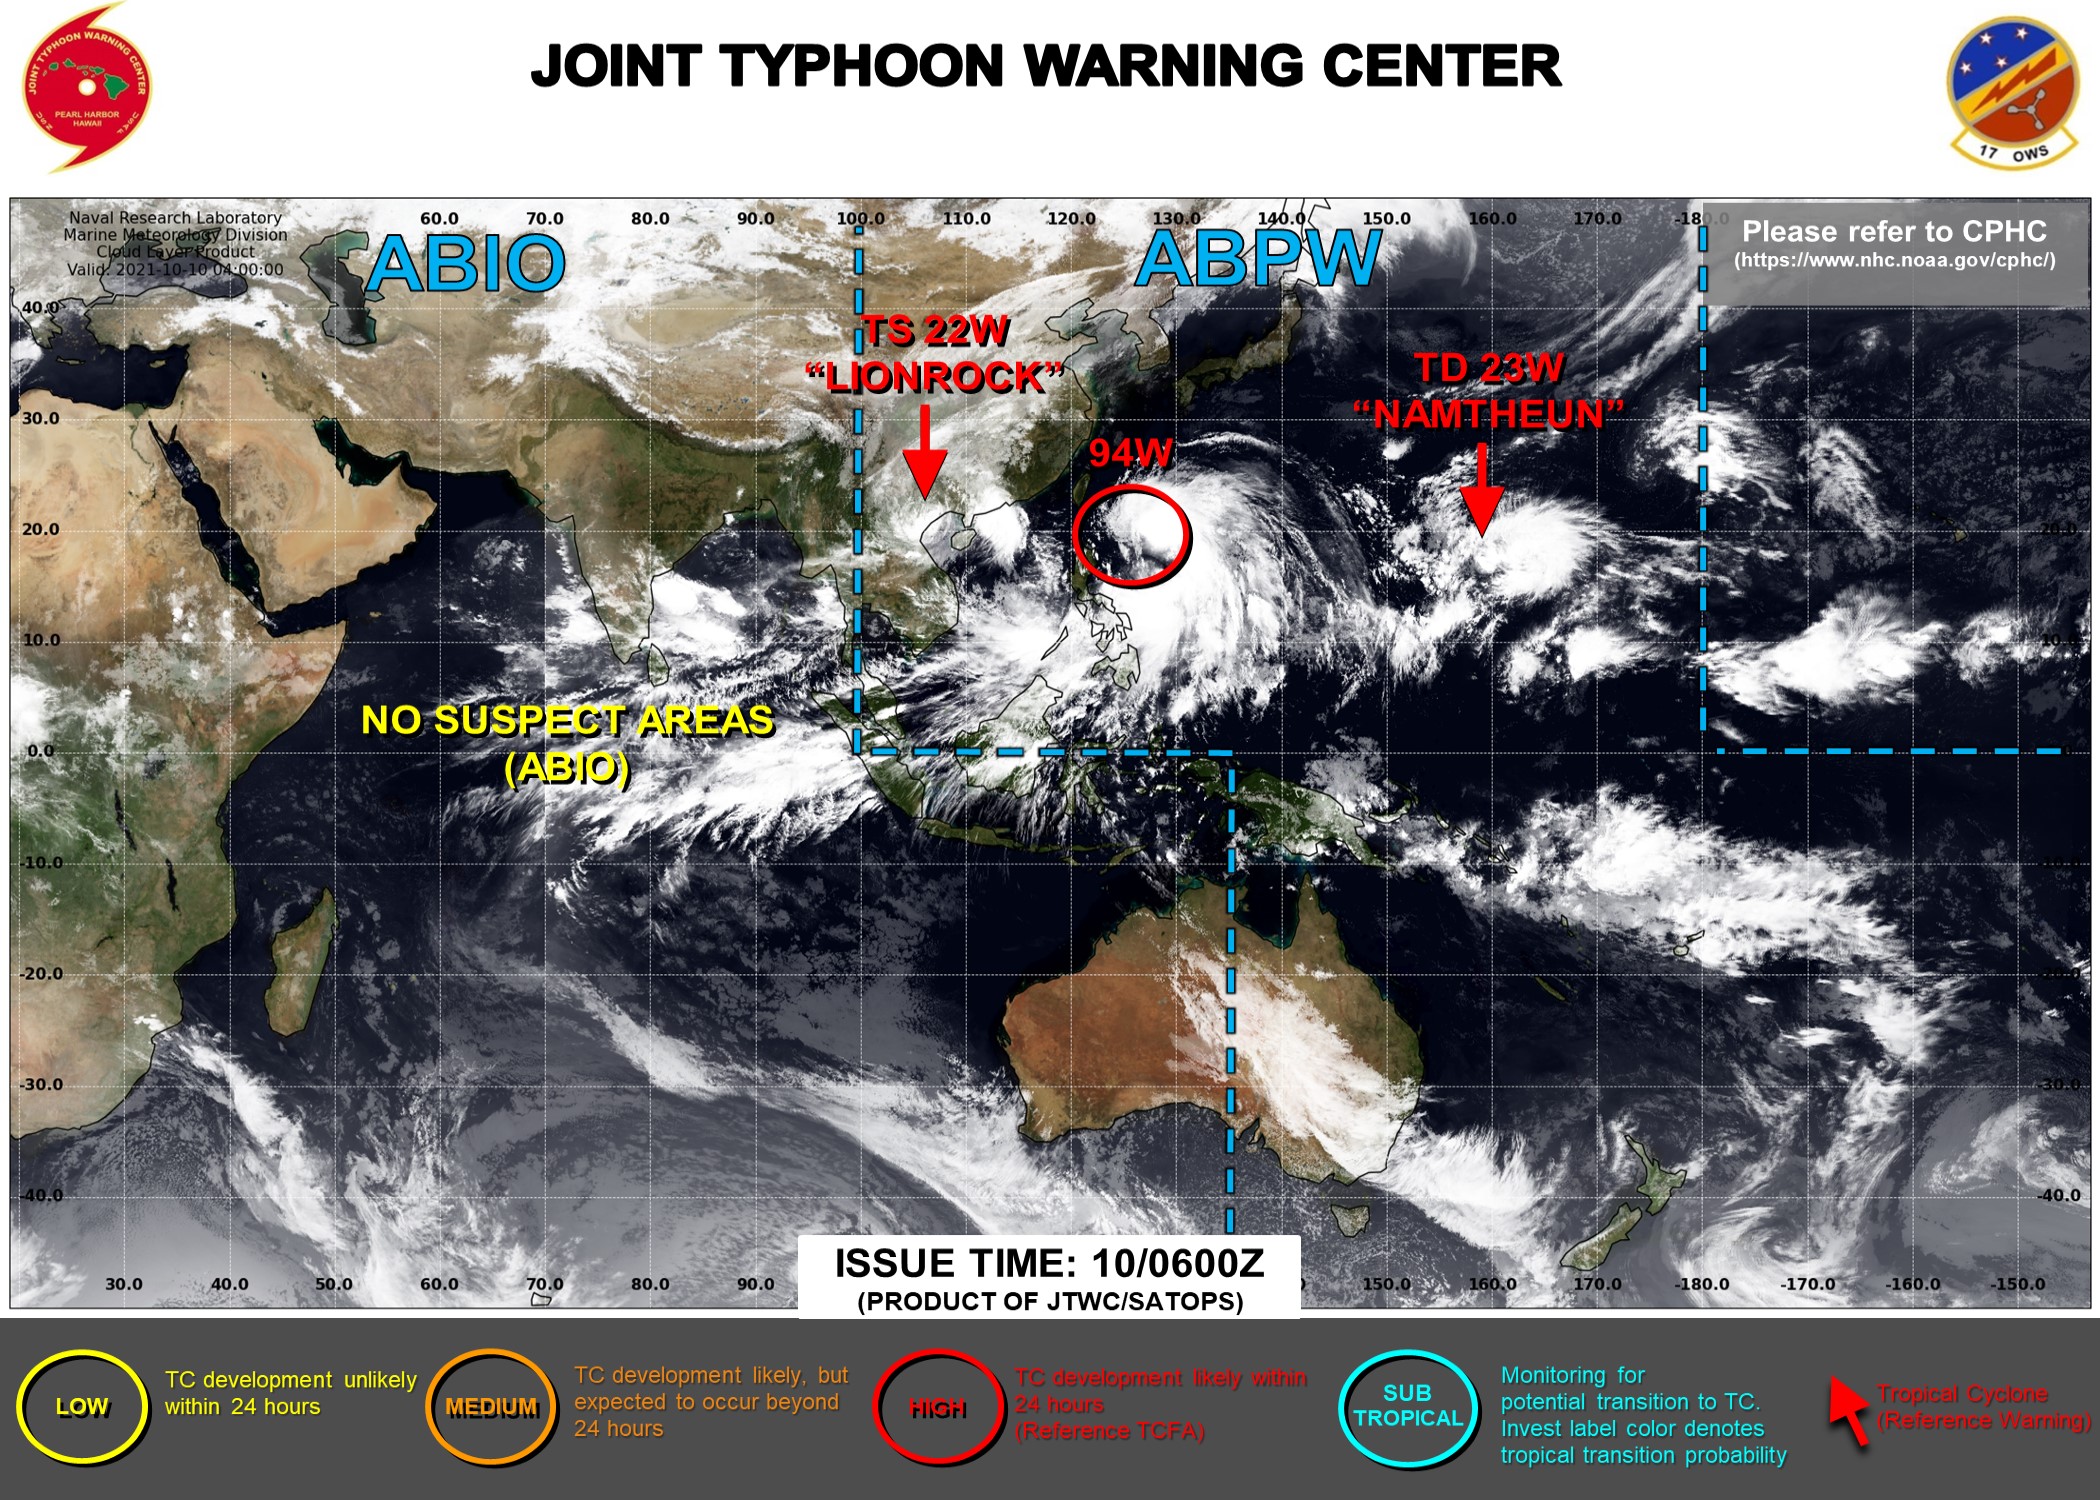 JTWC IS ISSUING 6HOURLY WARNINGS ON 22W AND 23W. 3HOURLY SATELLITE BULLETINS ARE ISSUED ON 22W, 23W, 93W AND 94W.